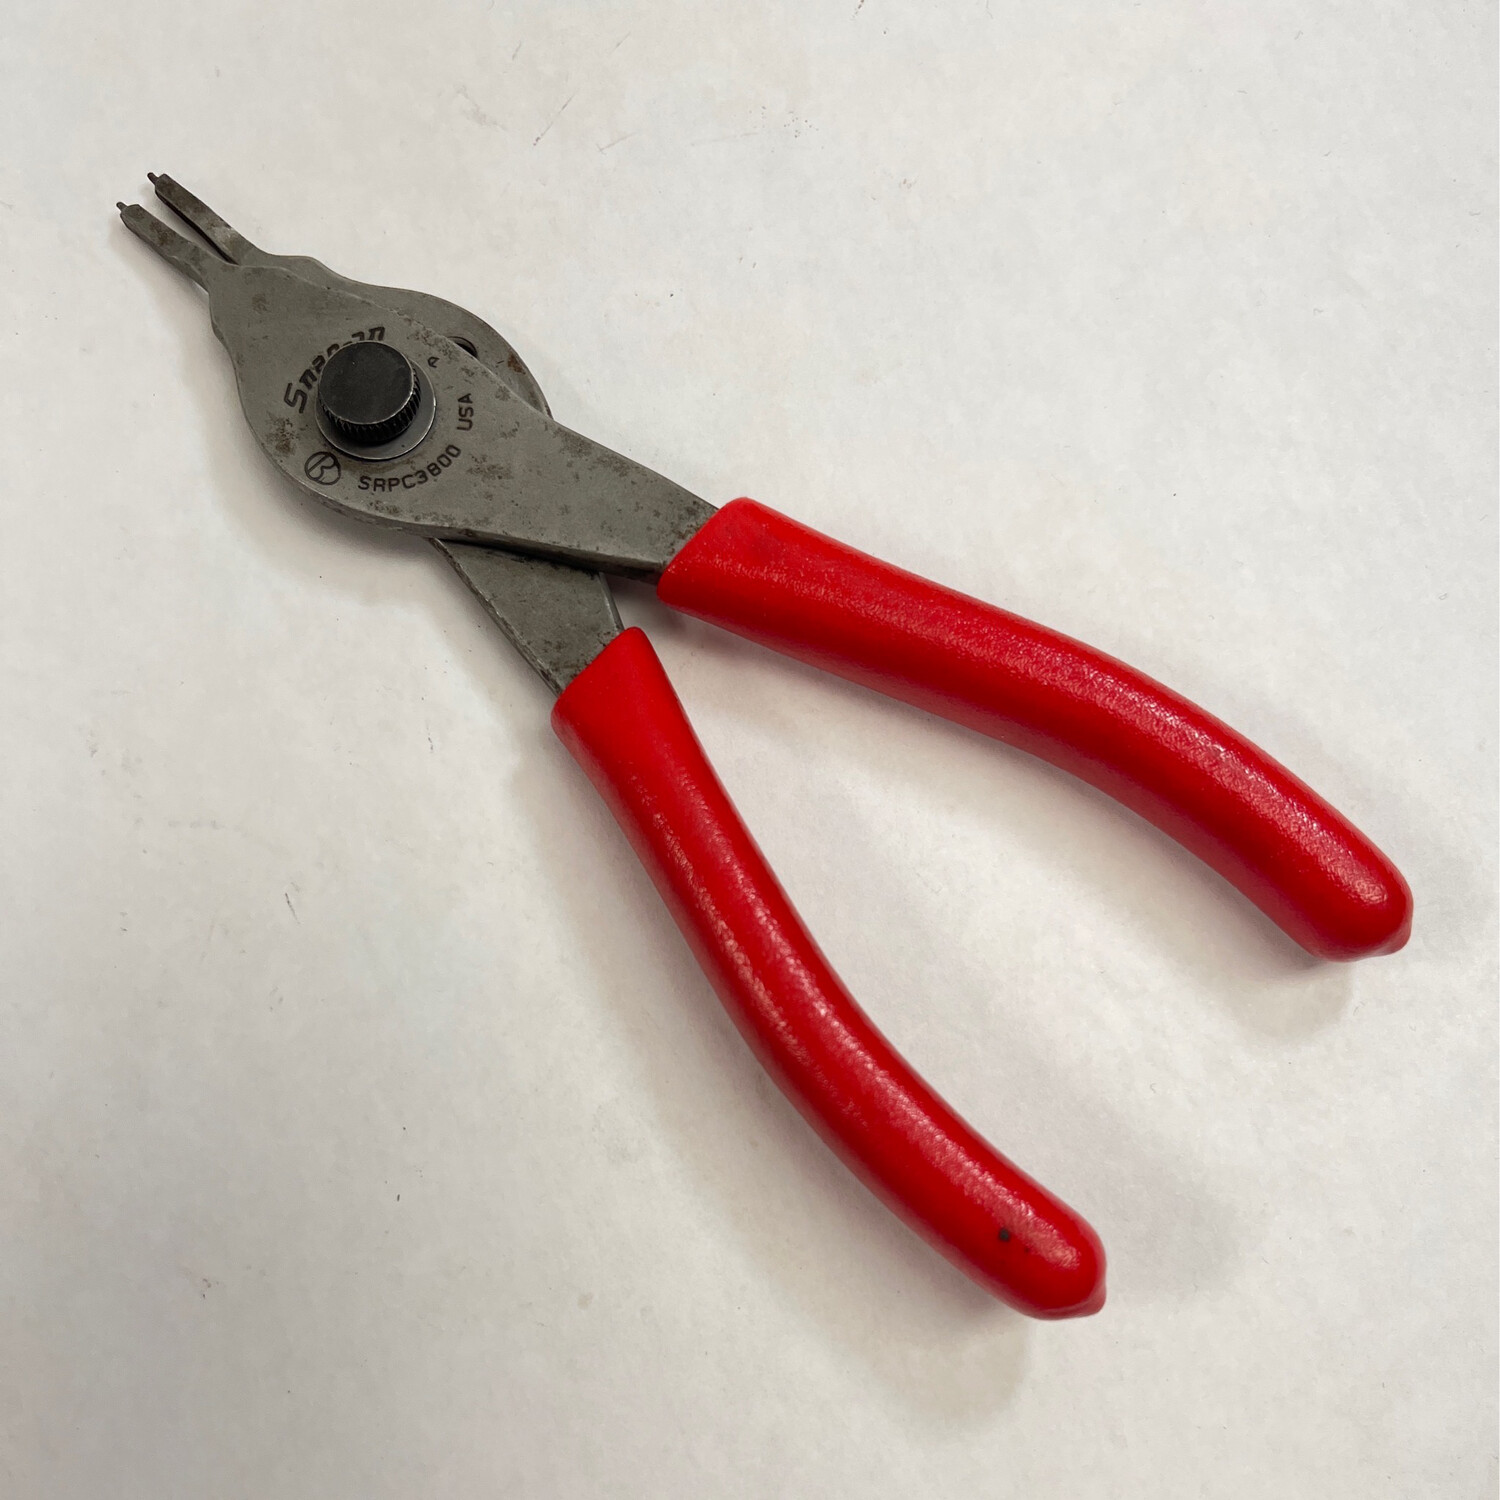 Snap On Convertible Retaining Ring Pliers, SRPC3800